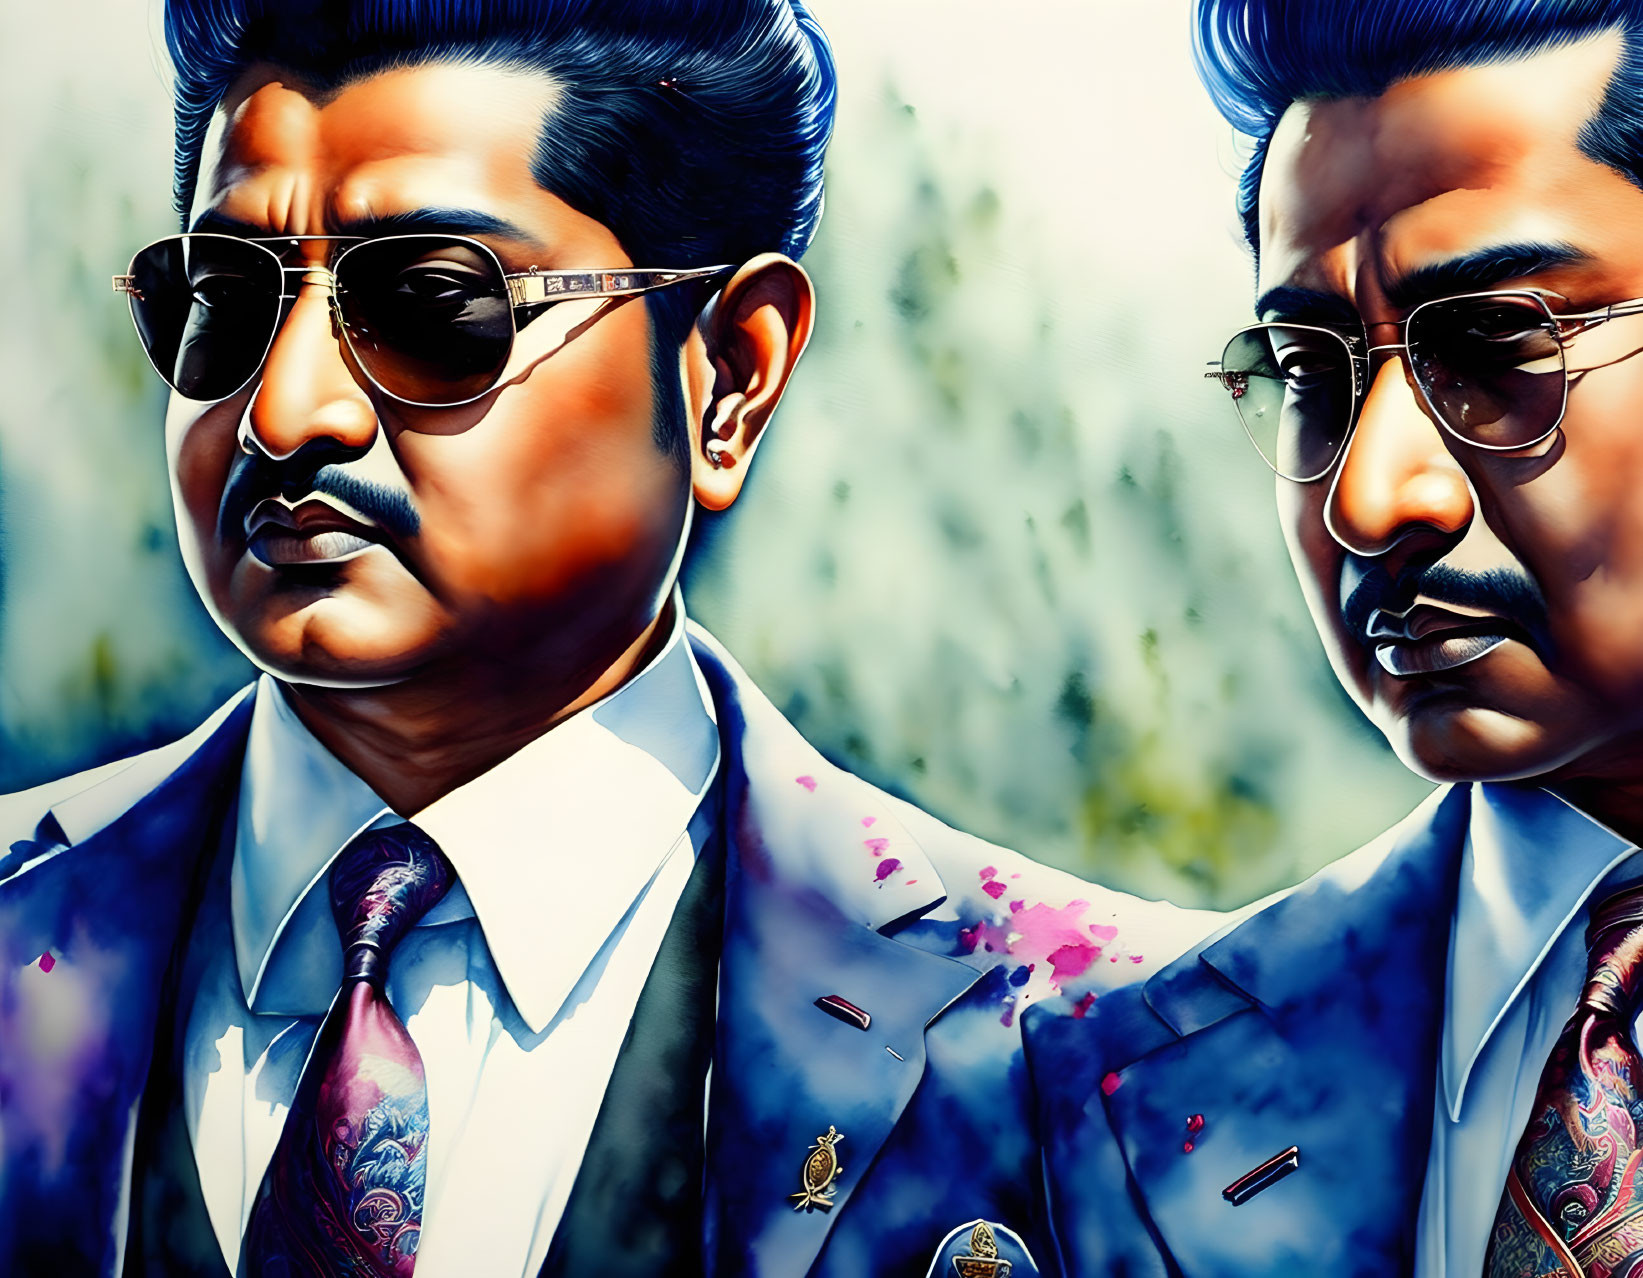 Men with Vintage Hairstyles in Suits and Sunglasses Against Colorful Floral Background